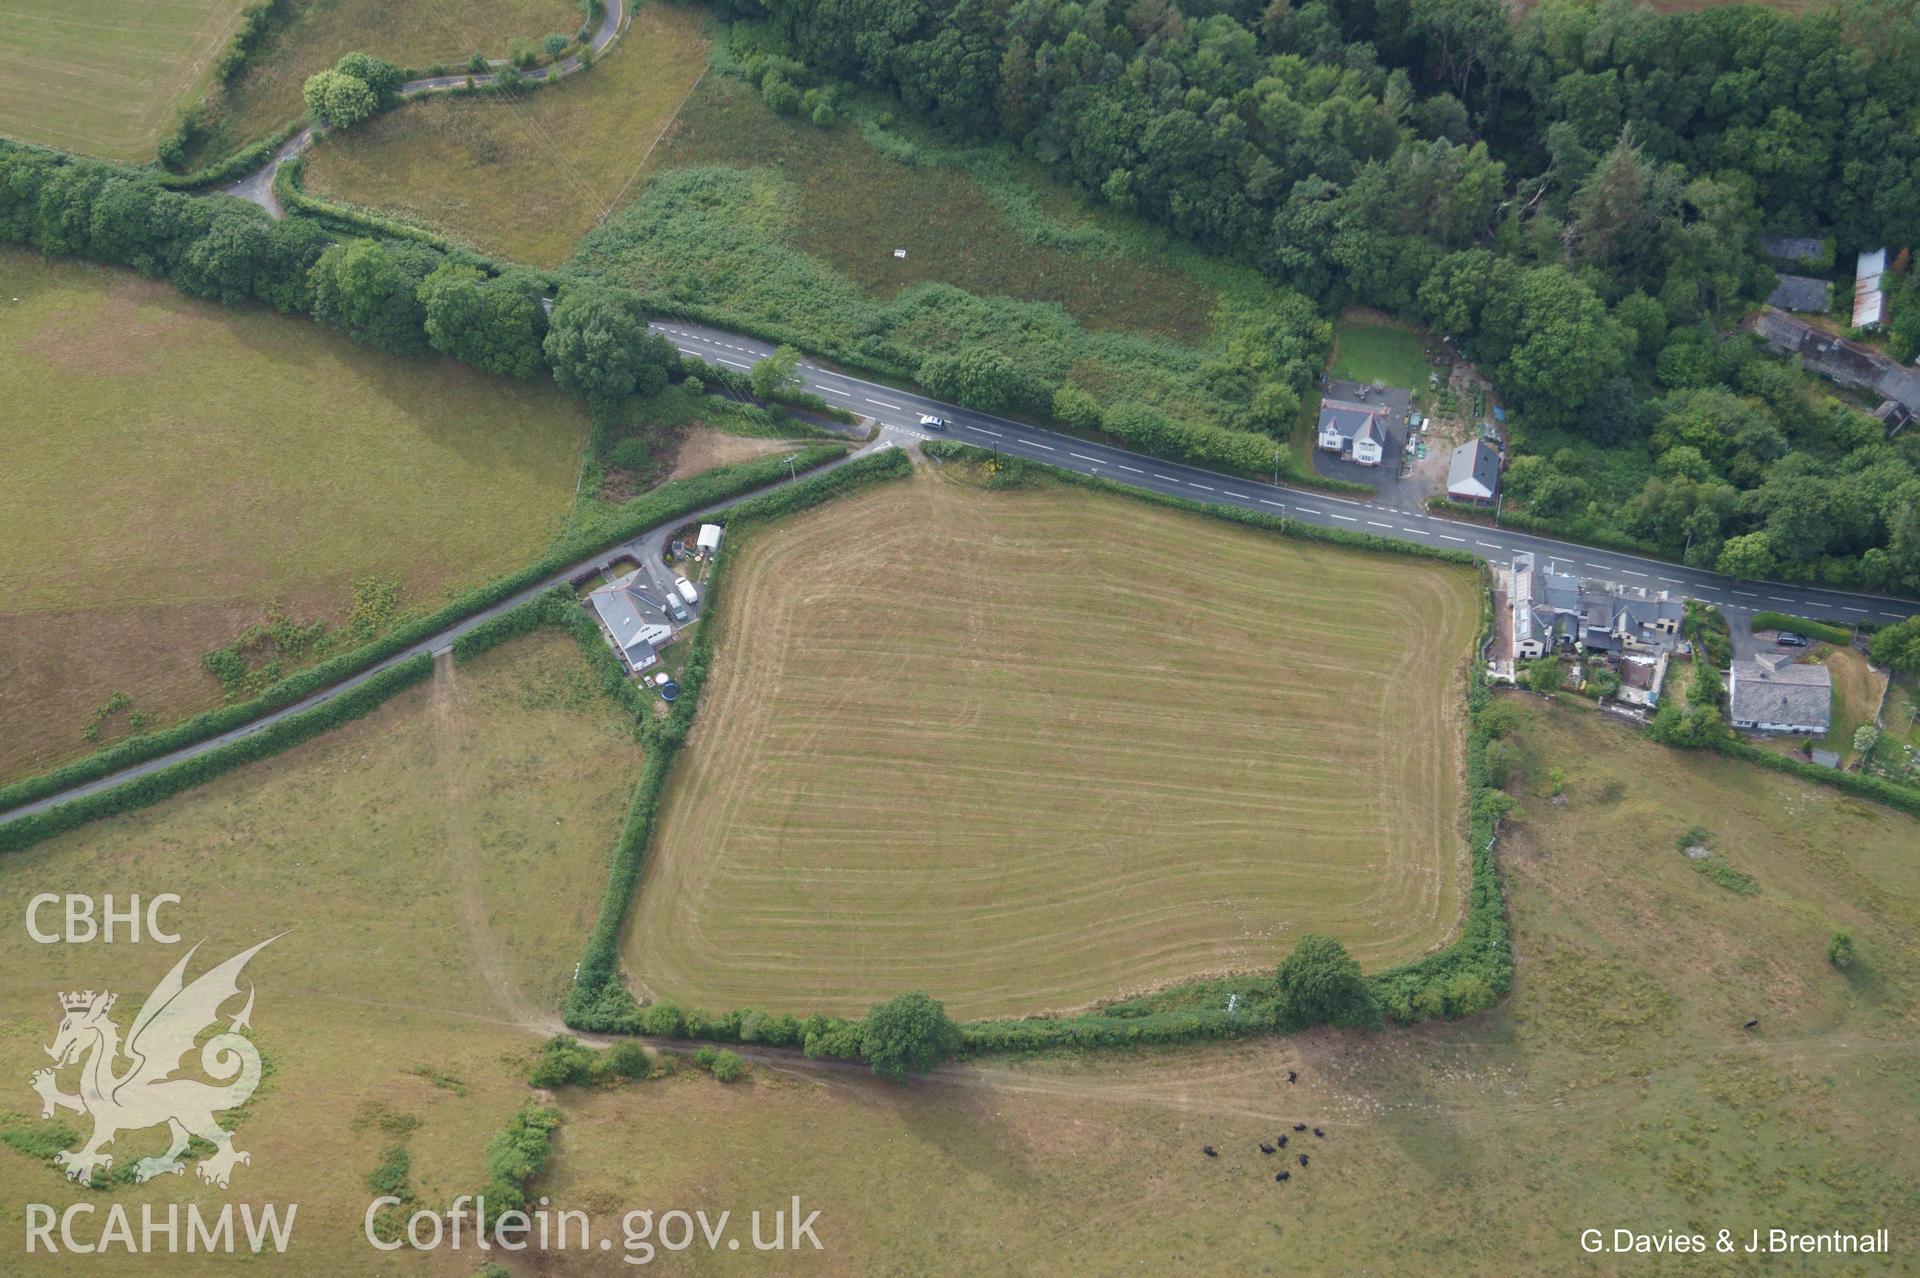 Aerial photograph of cropmarks on the south western outskirts of Talybont, taken by Glyn Davies and Jonathan Brentnall on 21st July 2018 under drought conditions.